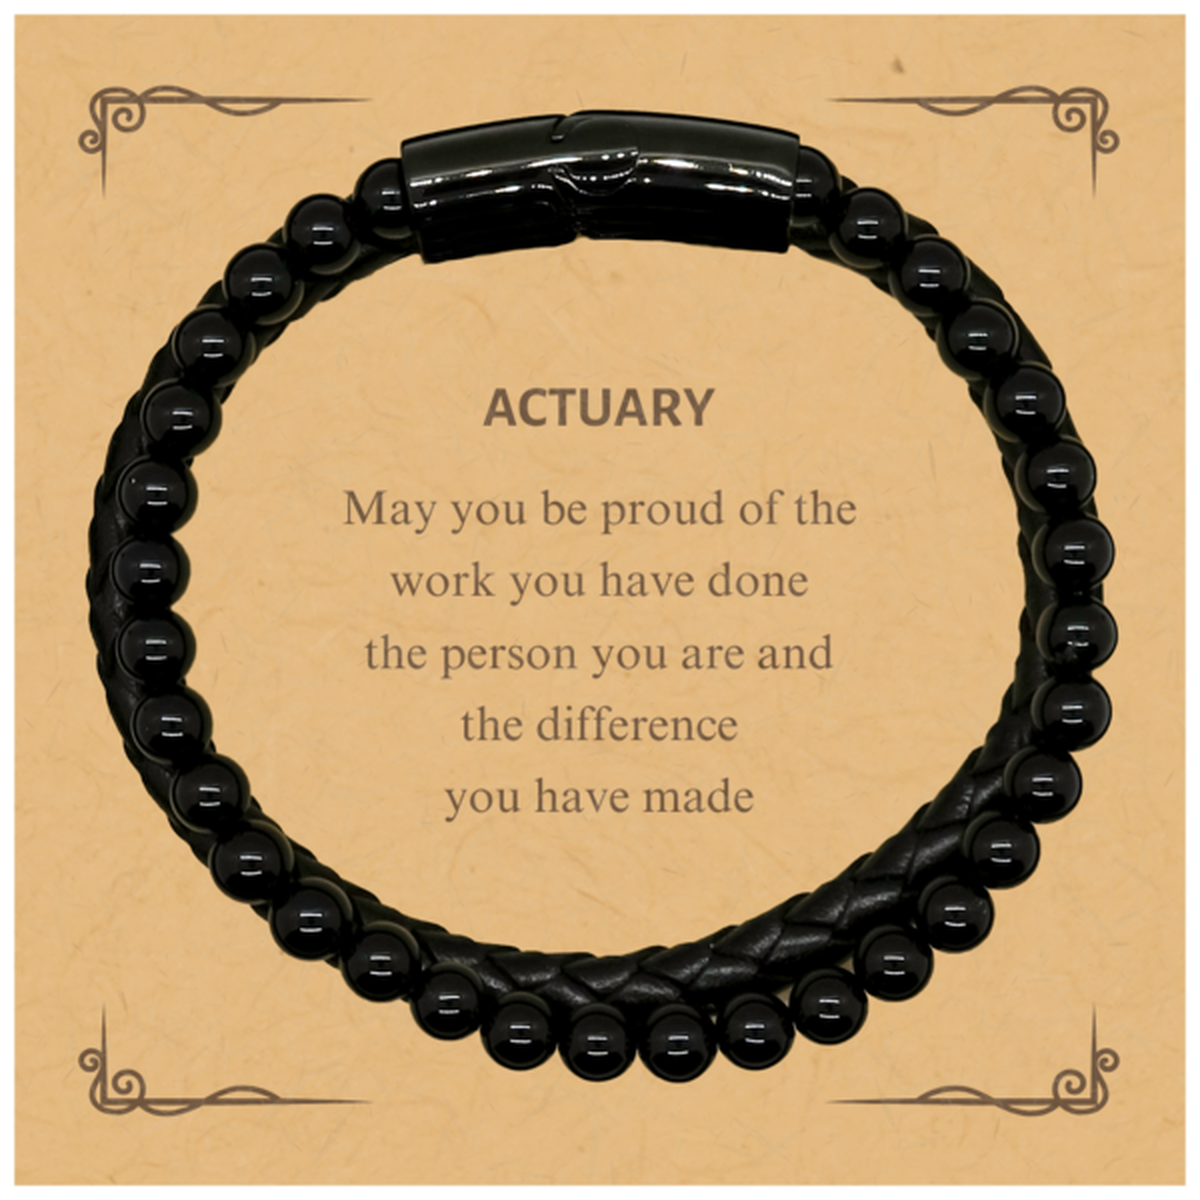 Actuary May you be proud of the work you have done, Retirement Actuary Stone Leather Bracelets for Colleague Appreciation Gifts Amazing for Actuary